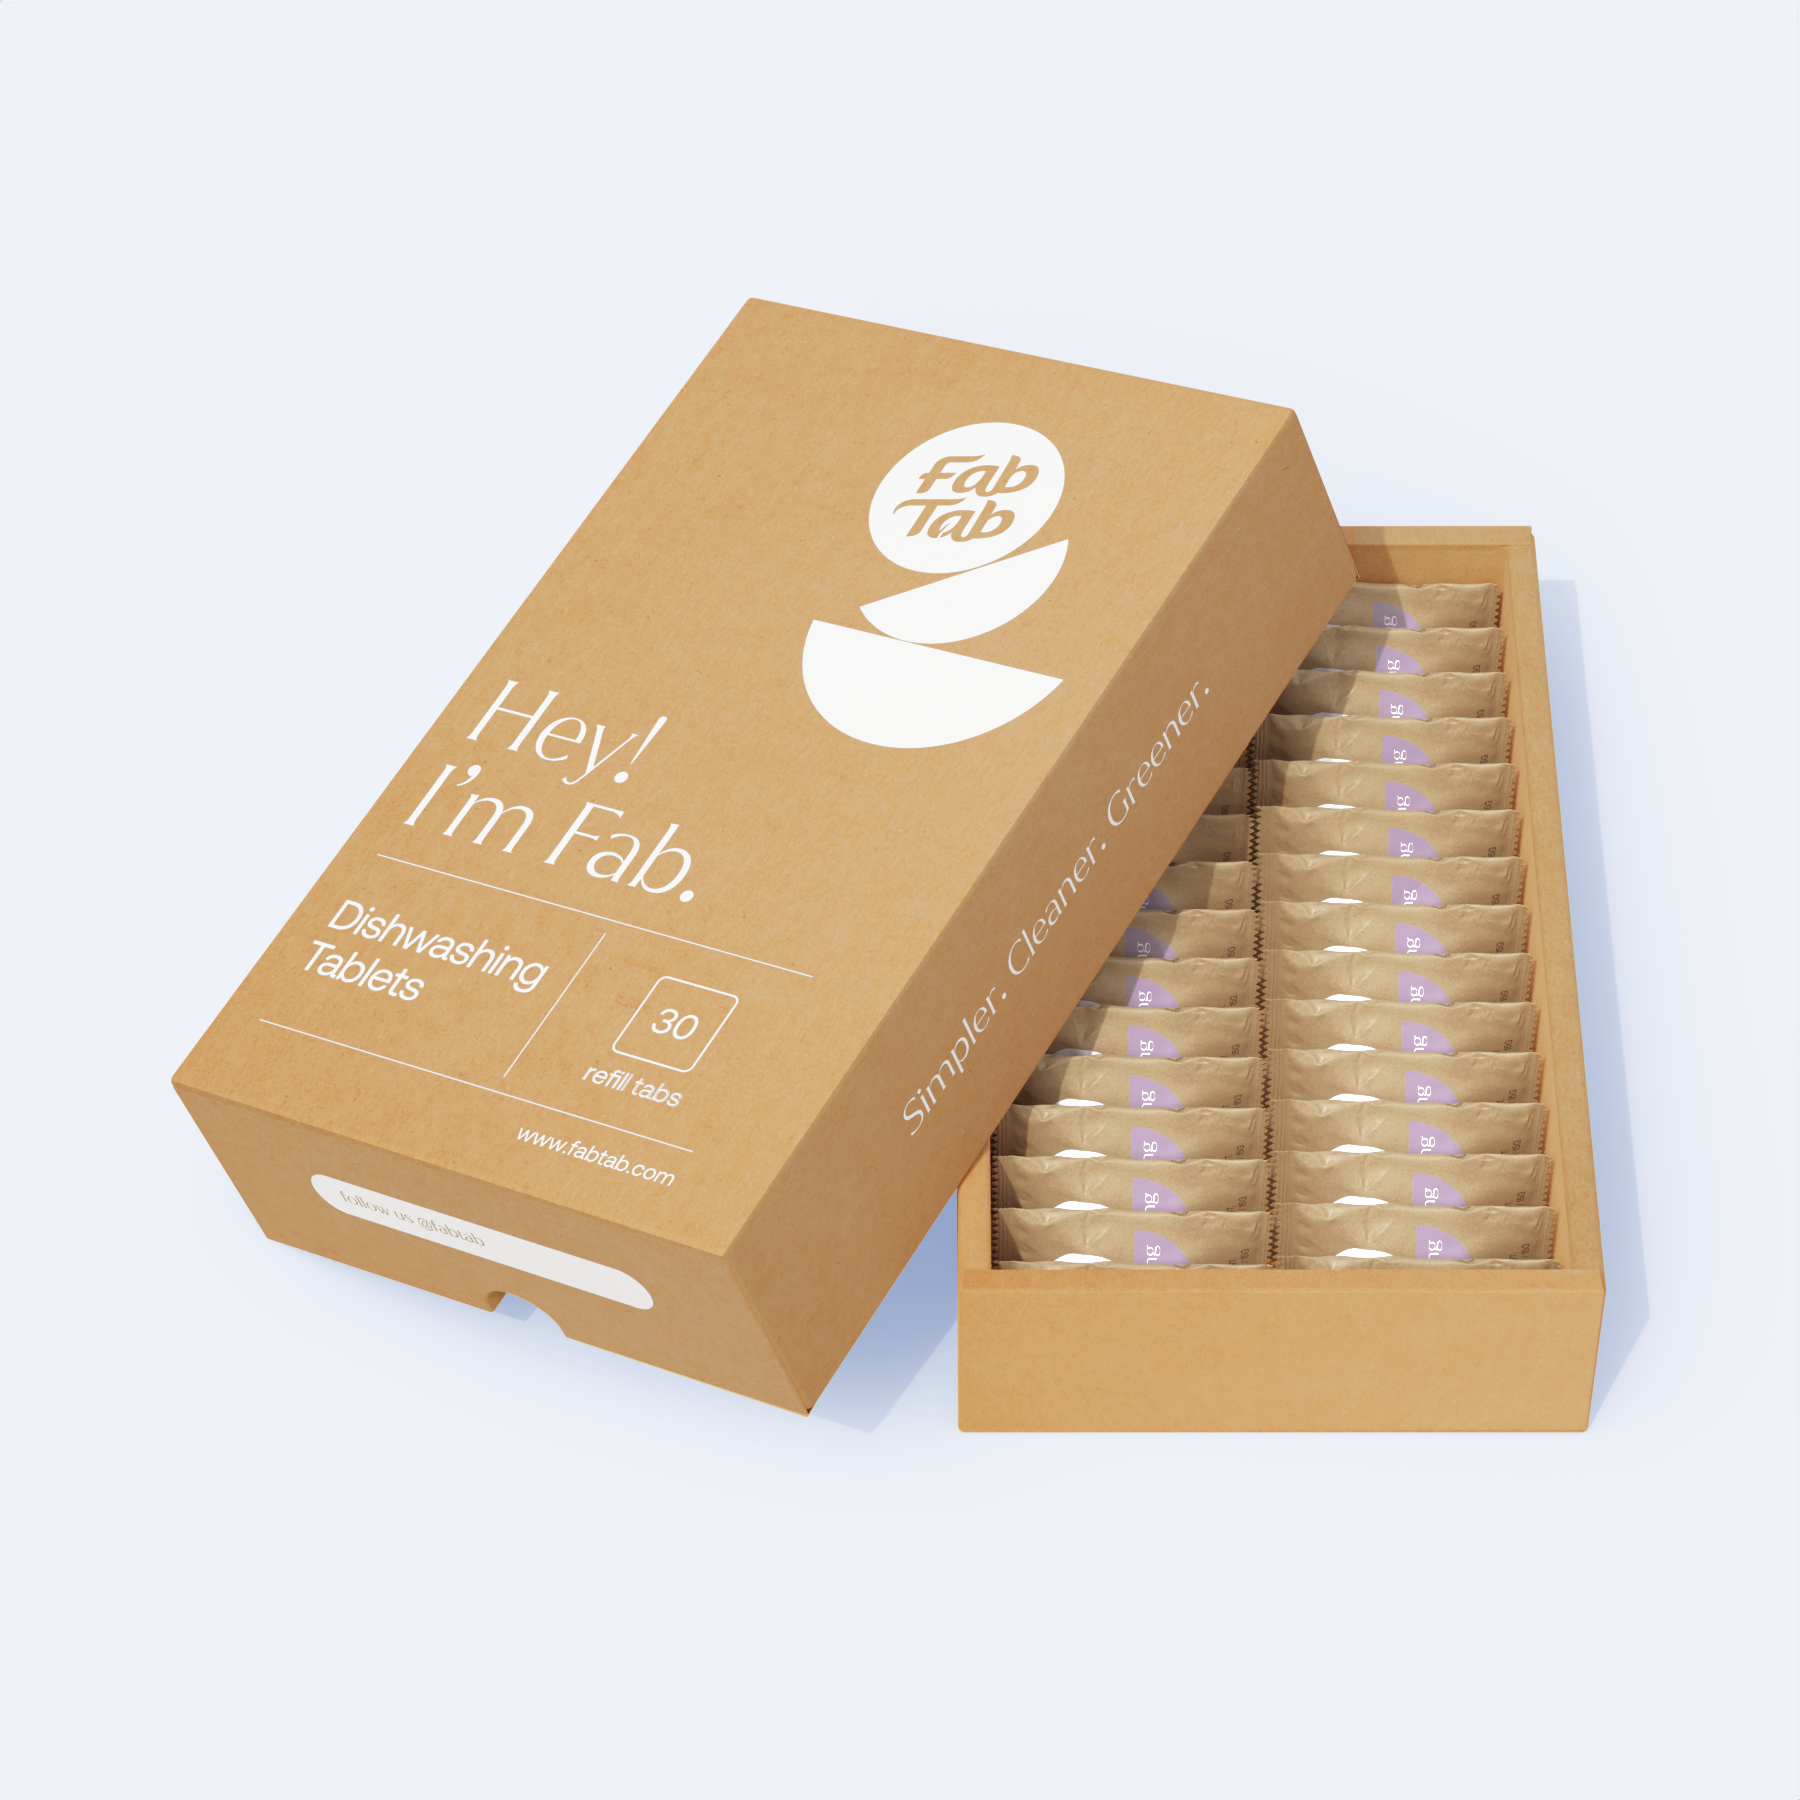 Load video: &lt;p&gt;Packaged in an environmentally conscious box crafted from recycled materials, you can truly embrace eco-friendly dishwashing with FabTab. After using the tablets, place the box into your compost bin, witnessing it break down to nourish the soil for a sustainable future!&lt;/p&gt;